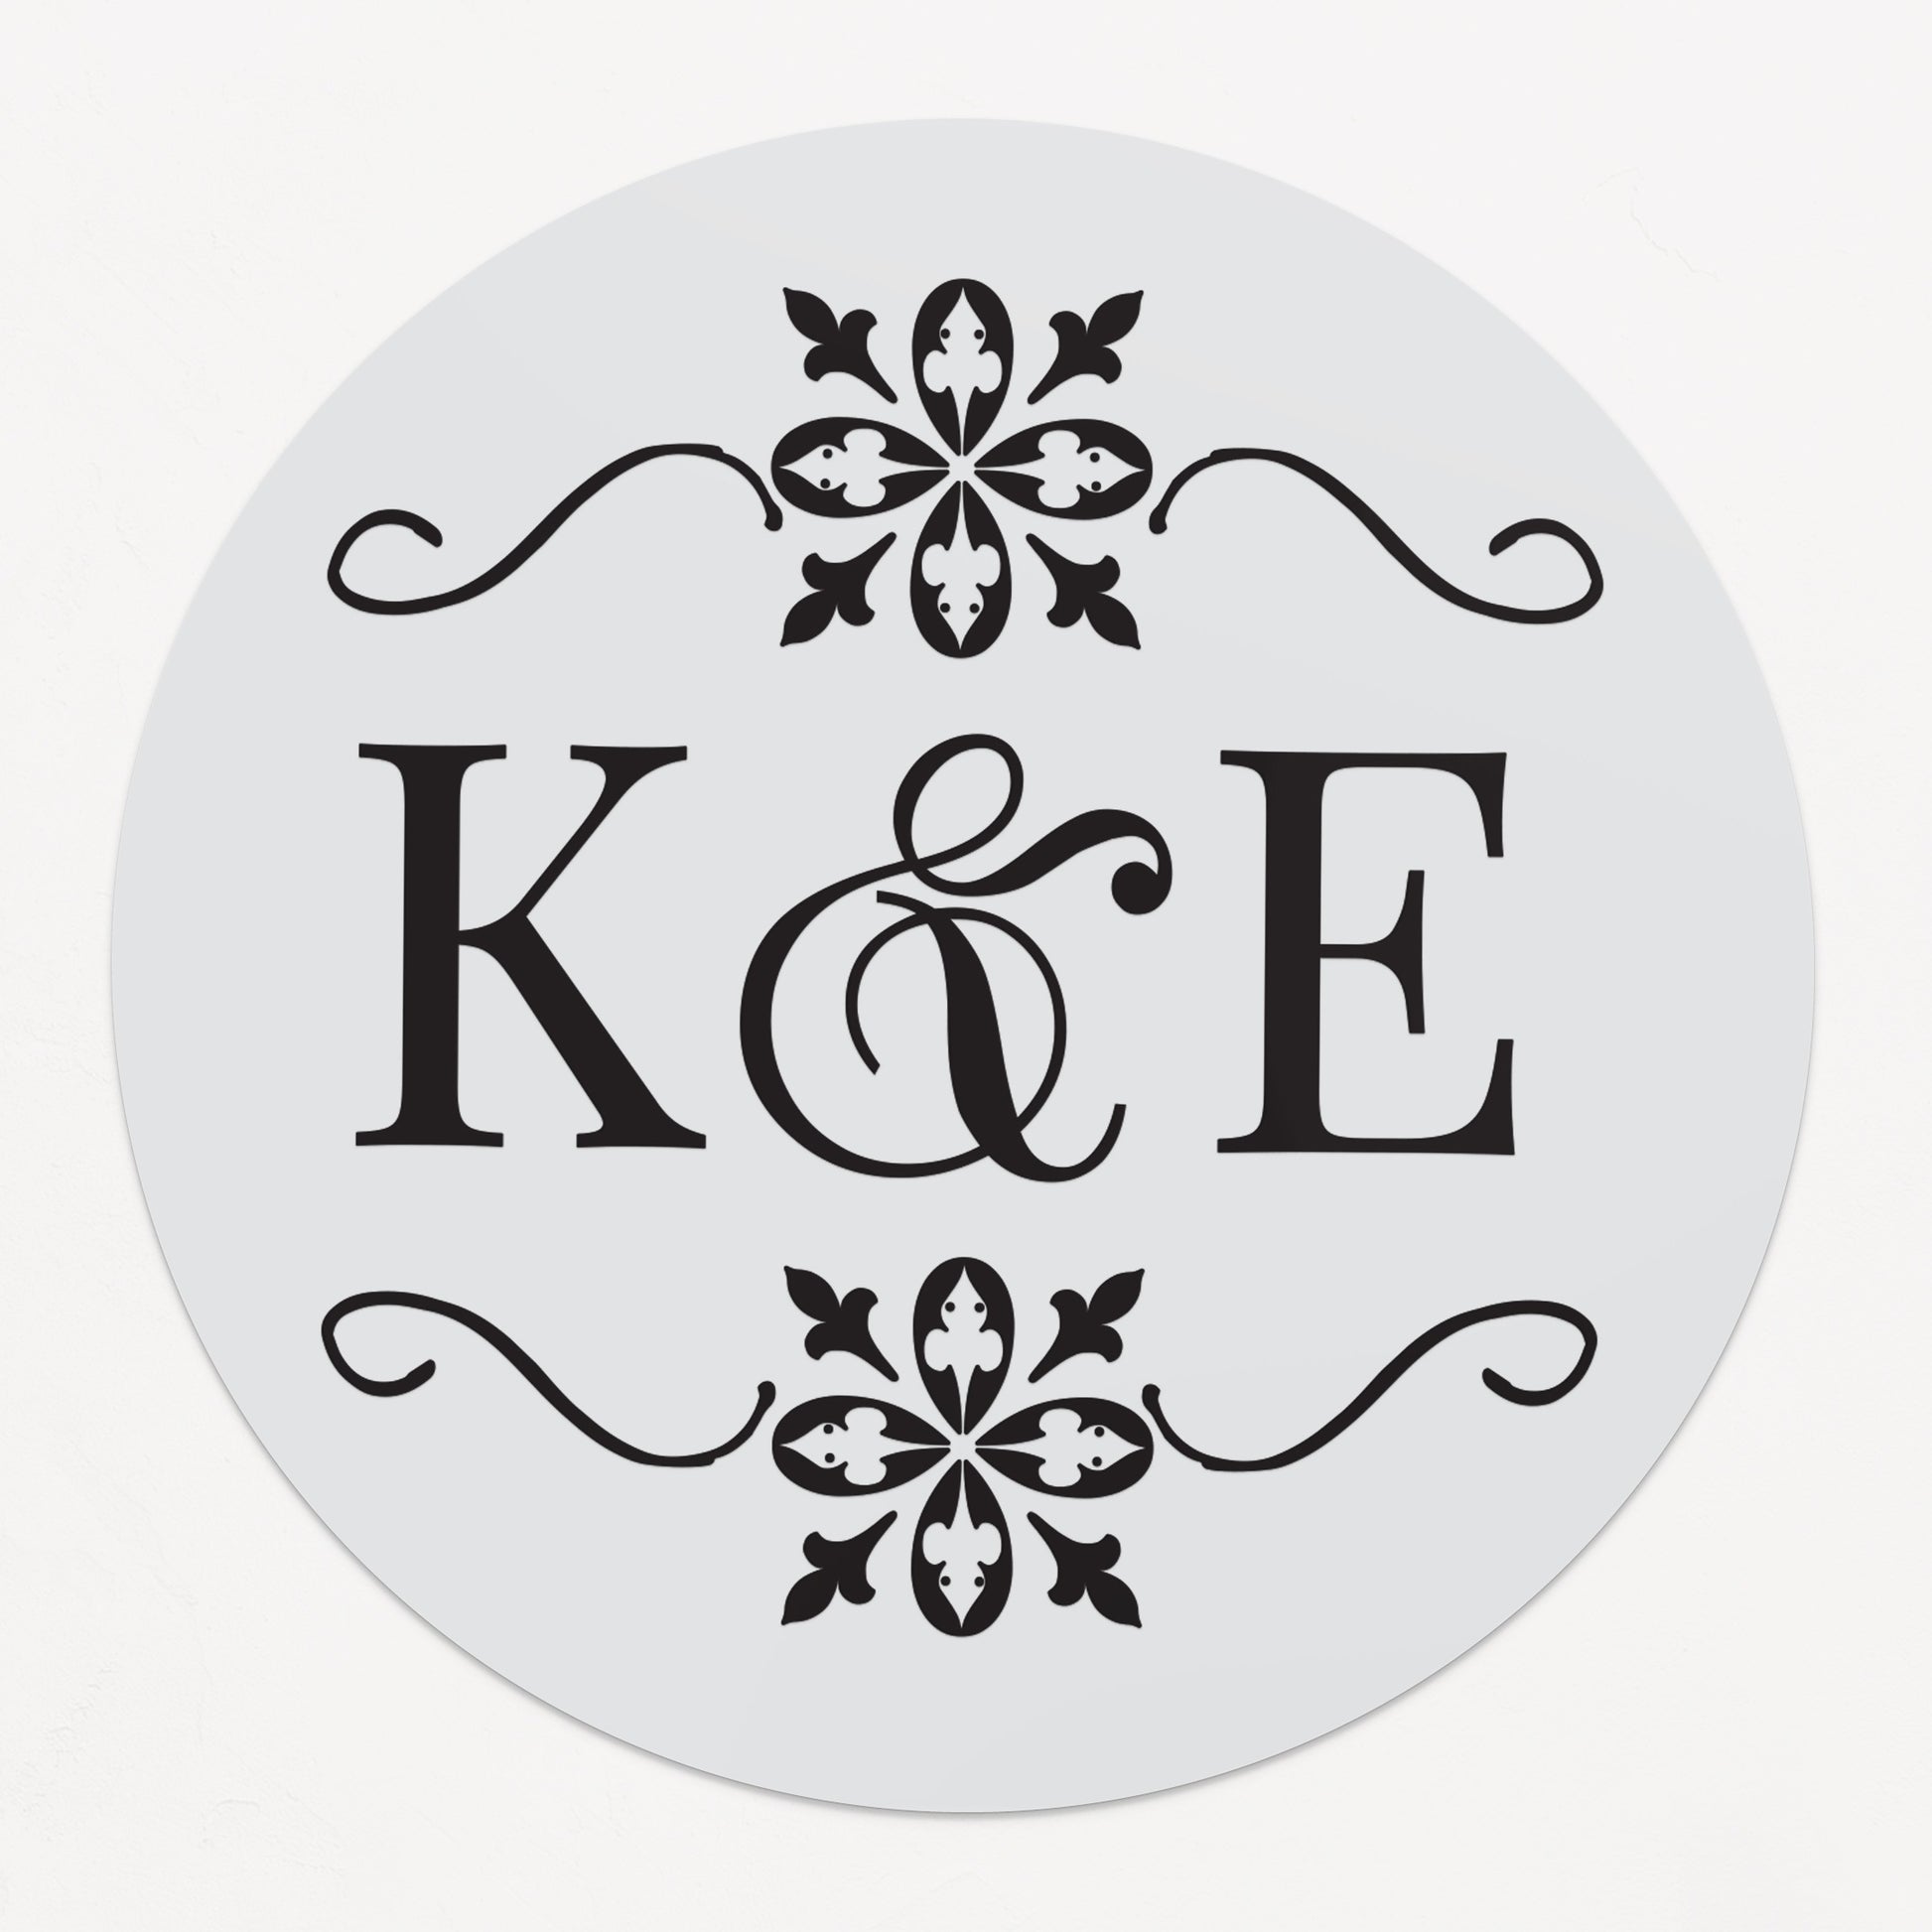 Transparent monogrammed wedding sticker with gold ornaments design and custom initials